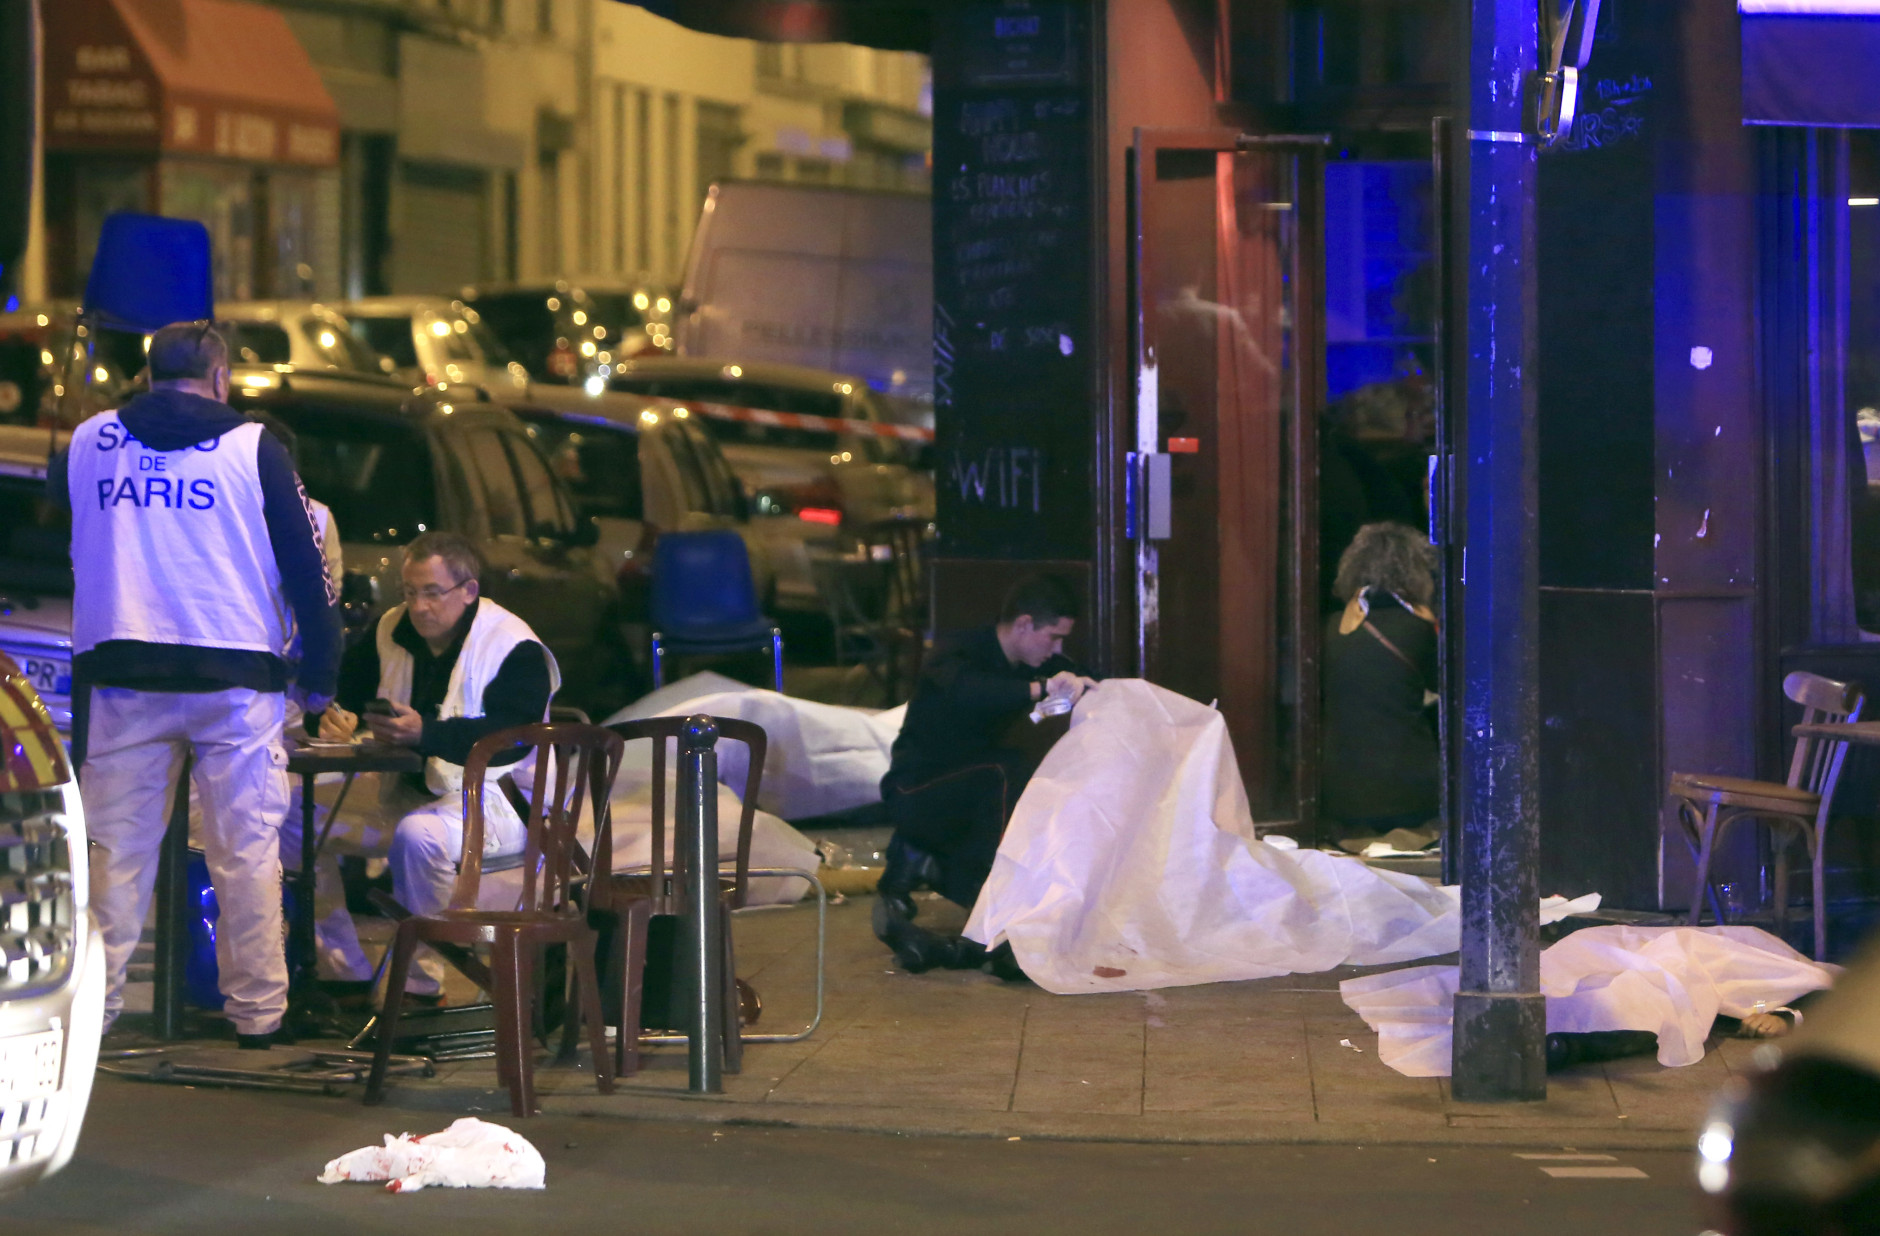 RETRANSMISSION FOR ALTERNATIVE CROP - Victims lay on the pavement outside a Paris restaurant, Friday, Nov. 13, 2015.  Police officials in France on Friday report multiple terror incidents, leaving many dead.  It was unclear at this stage if the events are linked. (AP Photo/Thibault Camus)